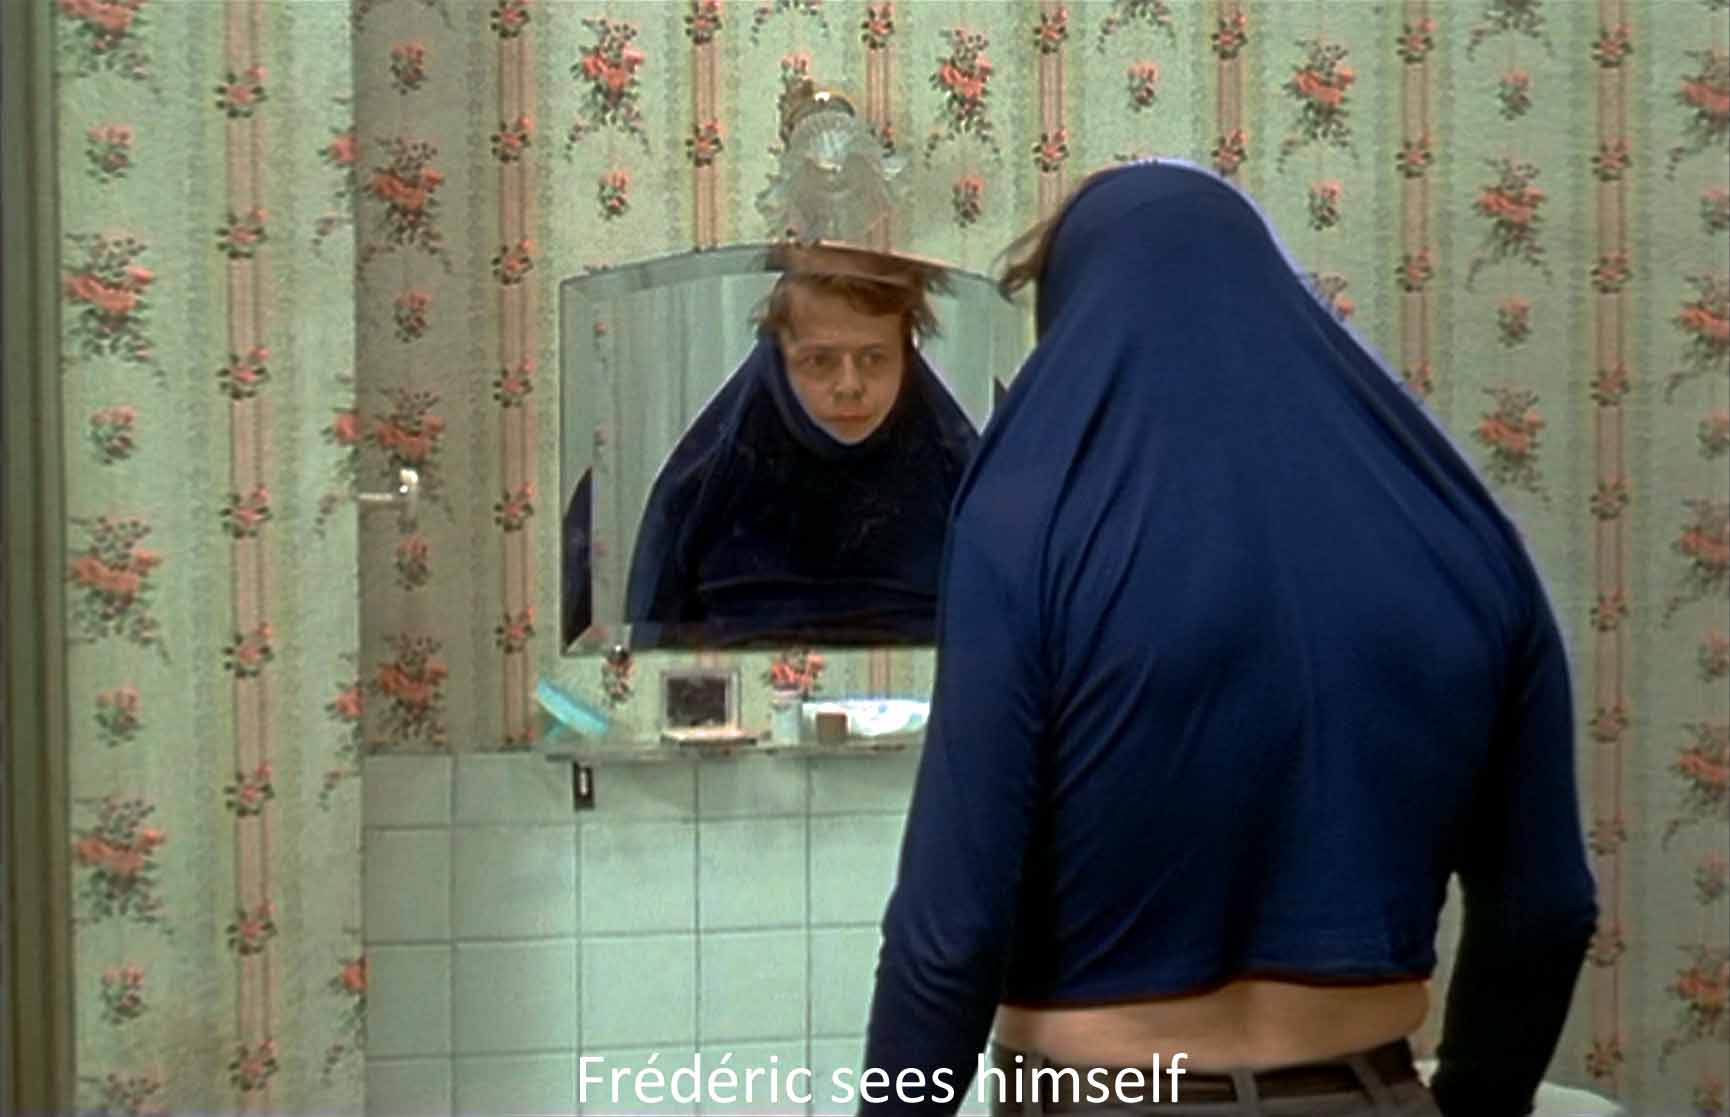 Frederic sees himself